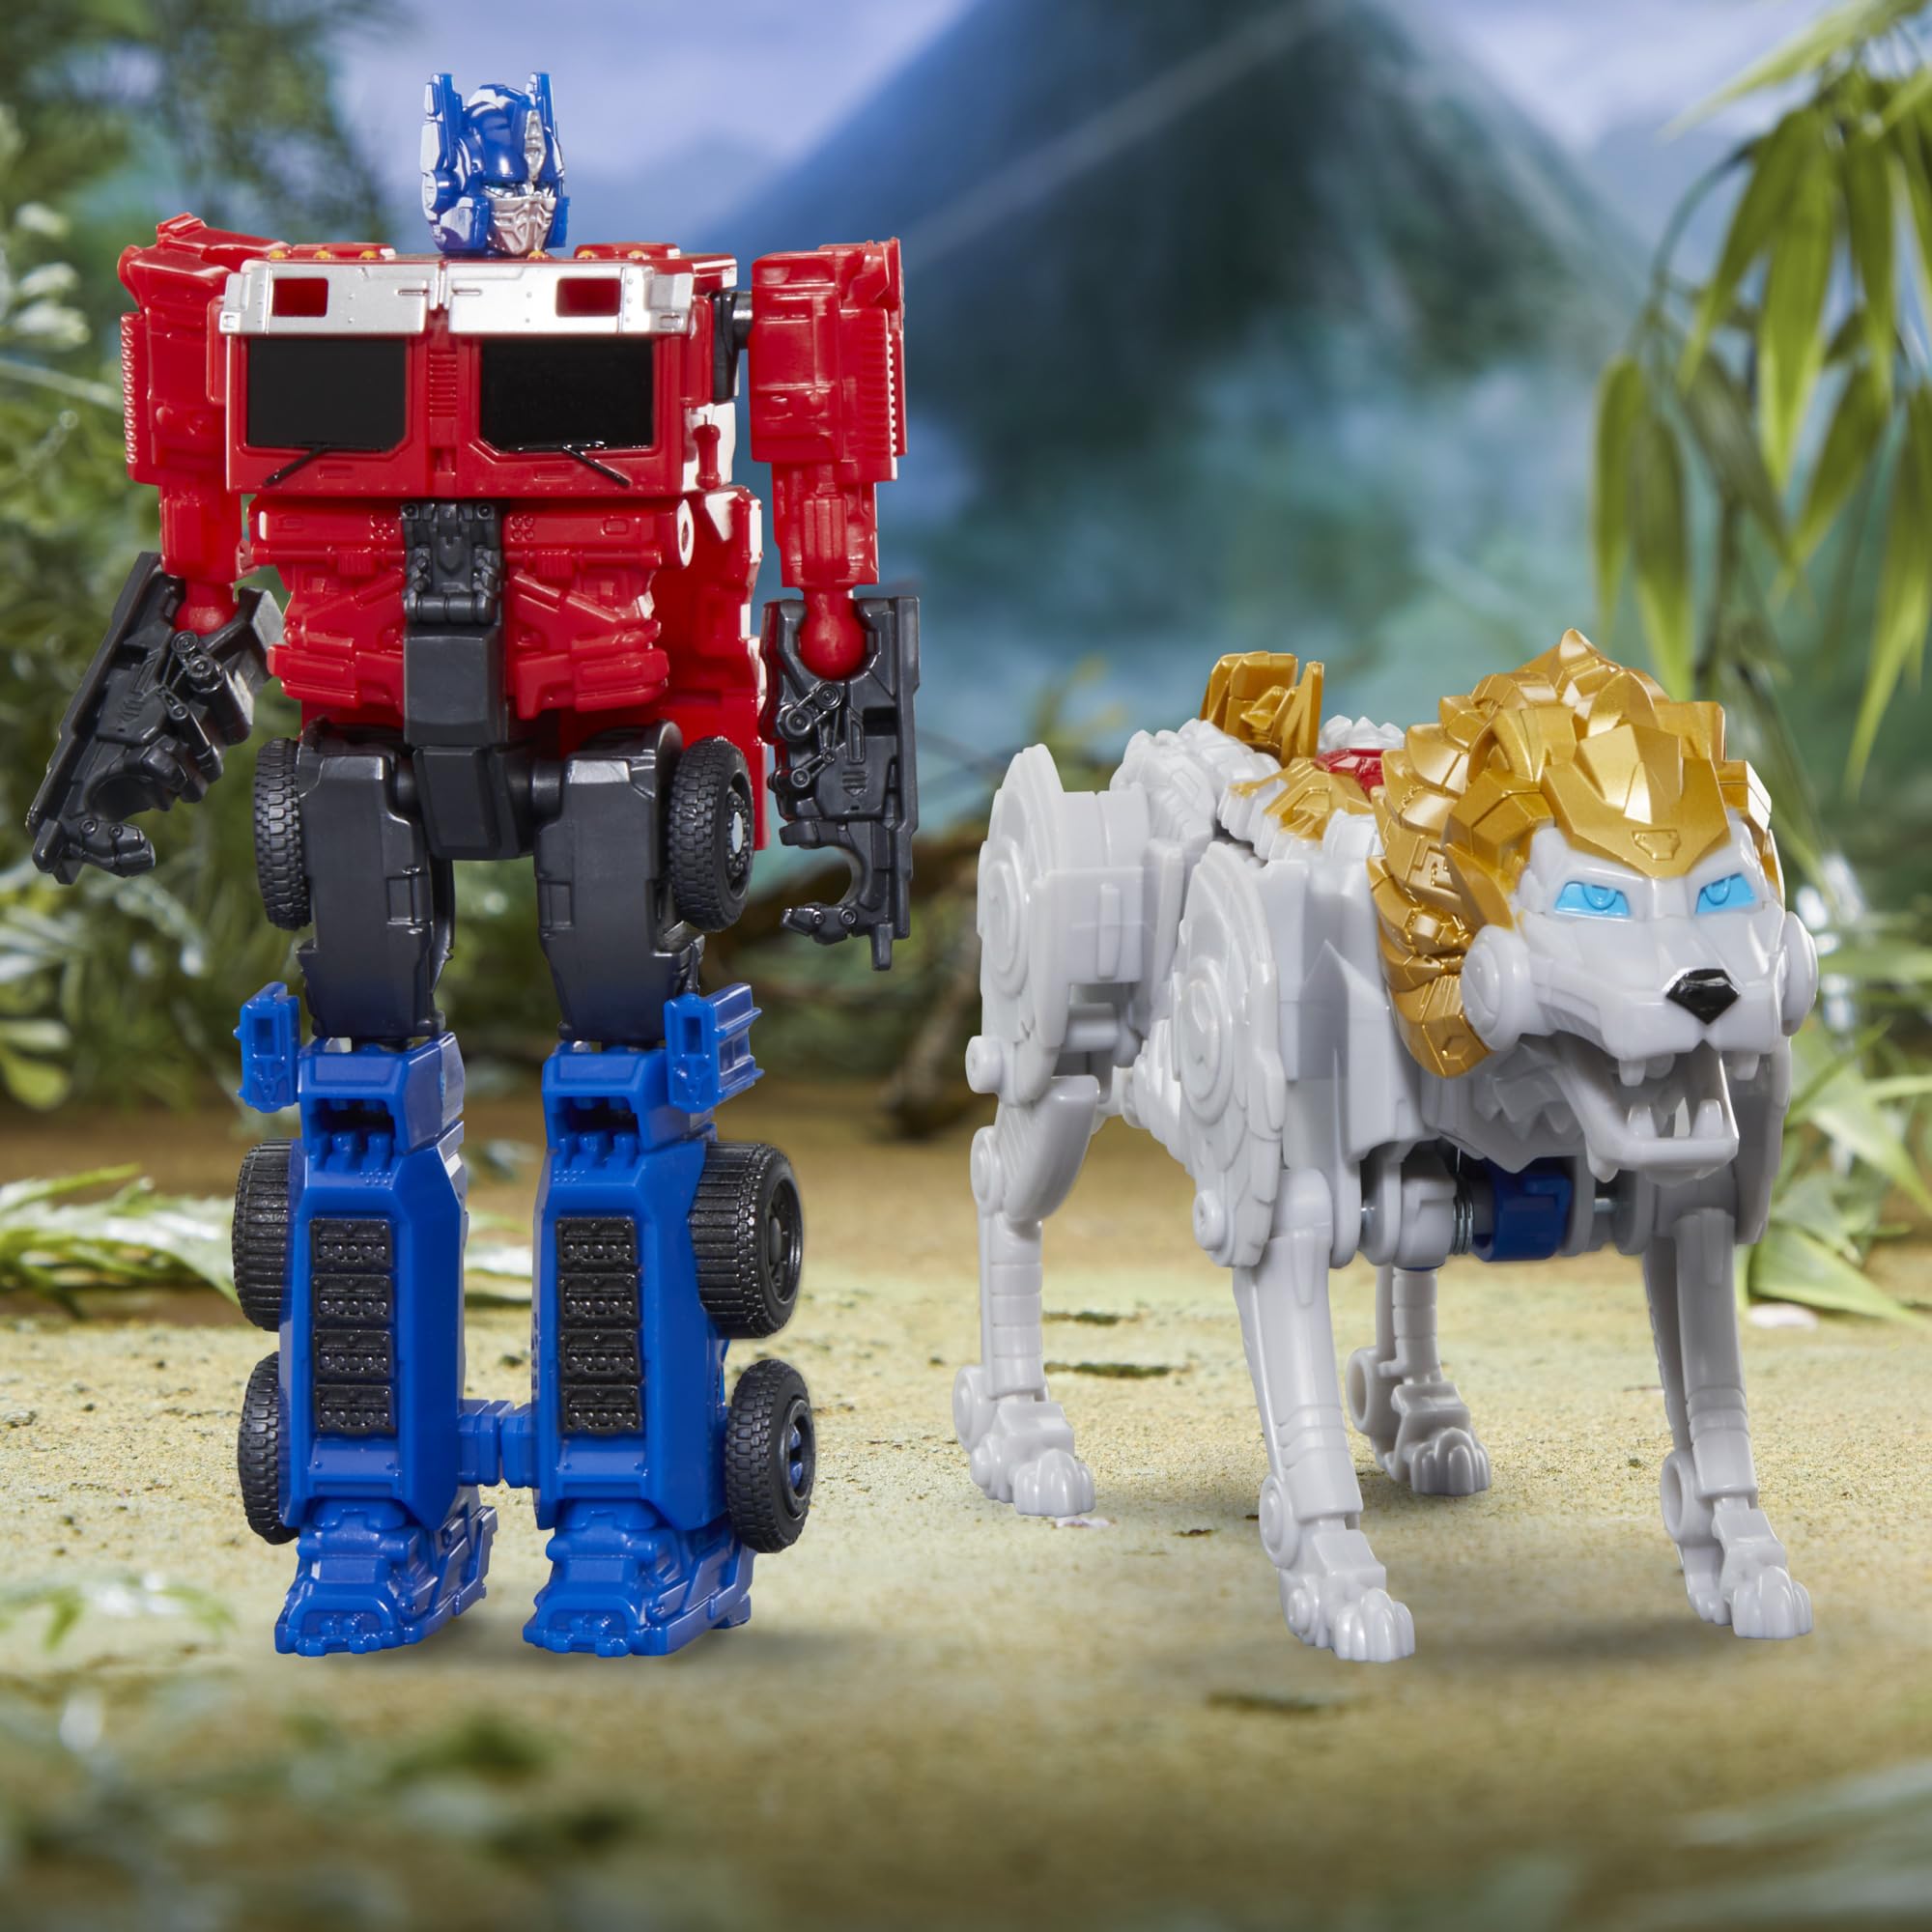 Transformers: Rise of The Beasts Movie, Beast Alliance, Beast Combiners 2-Pack Optimus Prime & Lionblade Toys, Ages 6 and Up, 5-inch